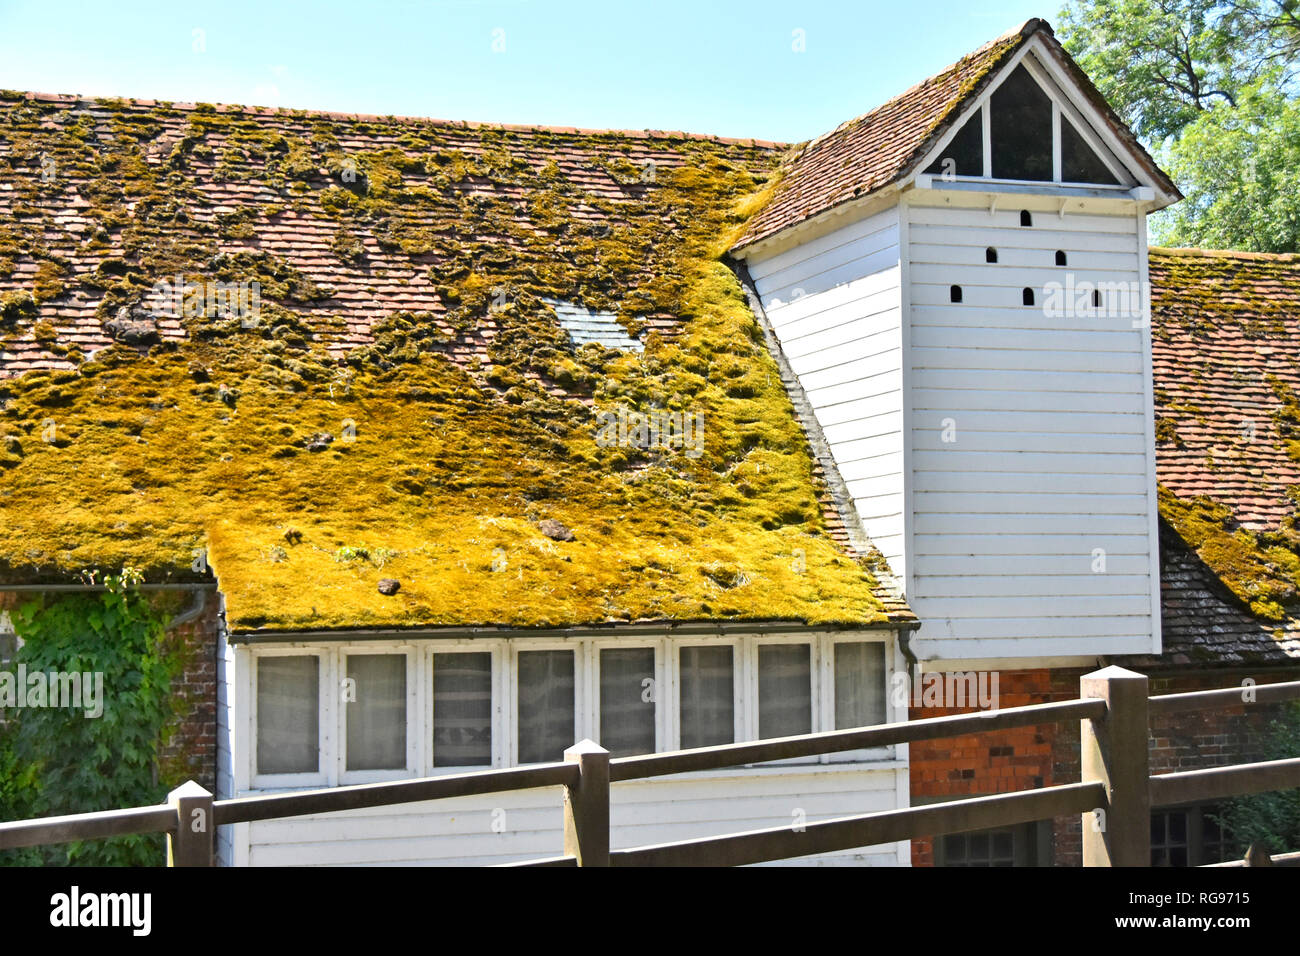 Growth of yellow green moss plant clinging to roofing tiles on steep sloping roof Goring Mill riverside watermill building Oxfordshire England UK Stock Photo